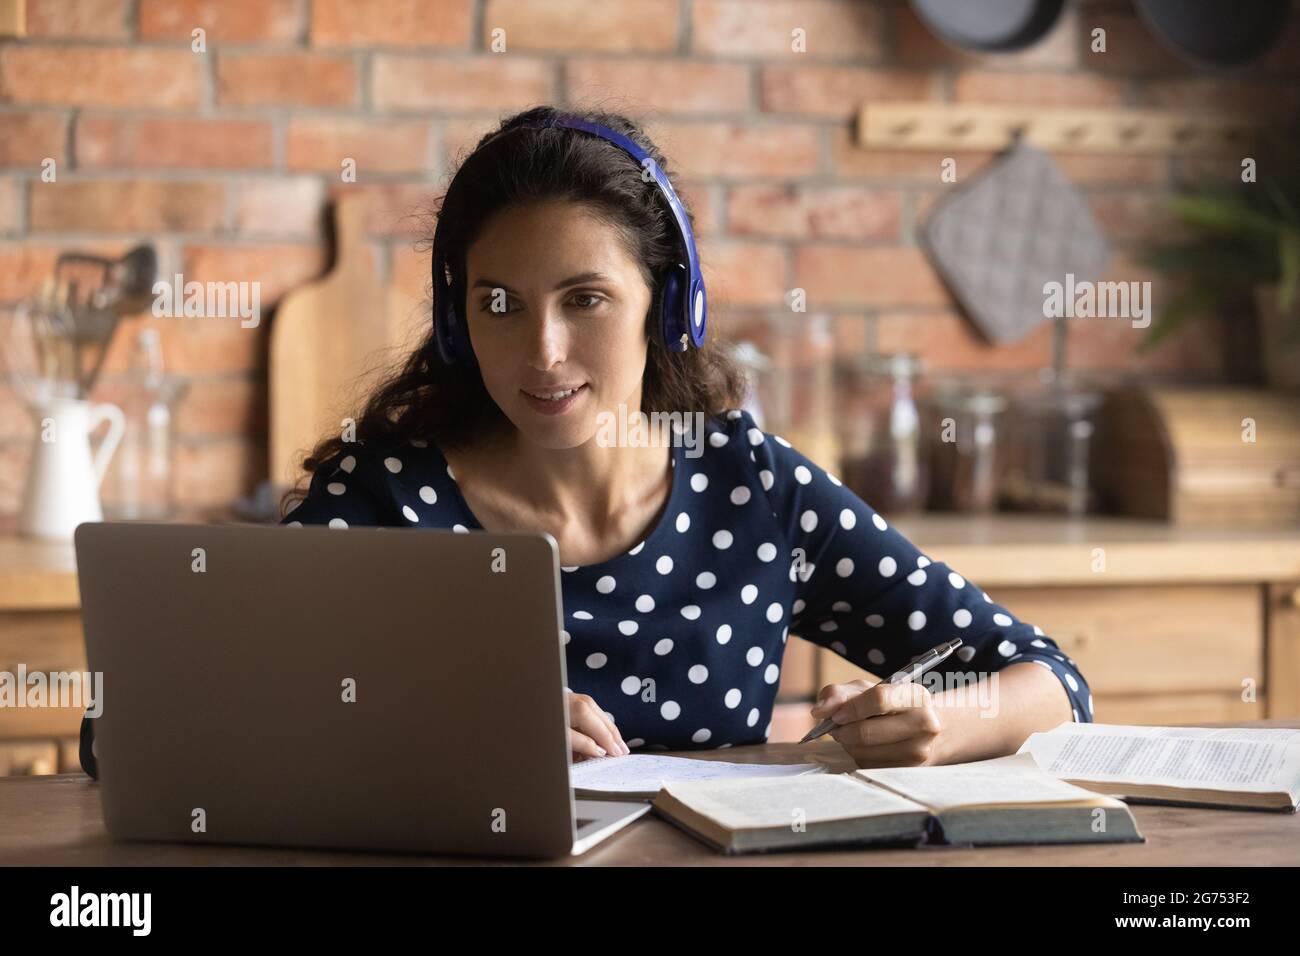 Happy focused female adult student with headphones and laptop Stock Photo